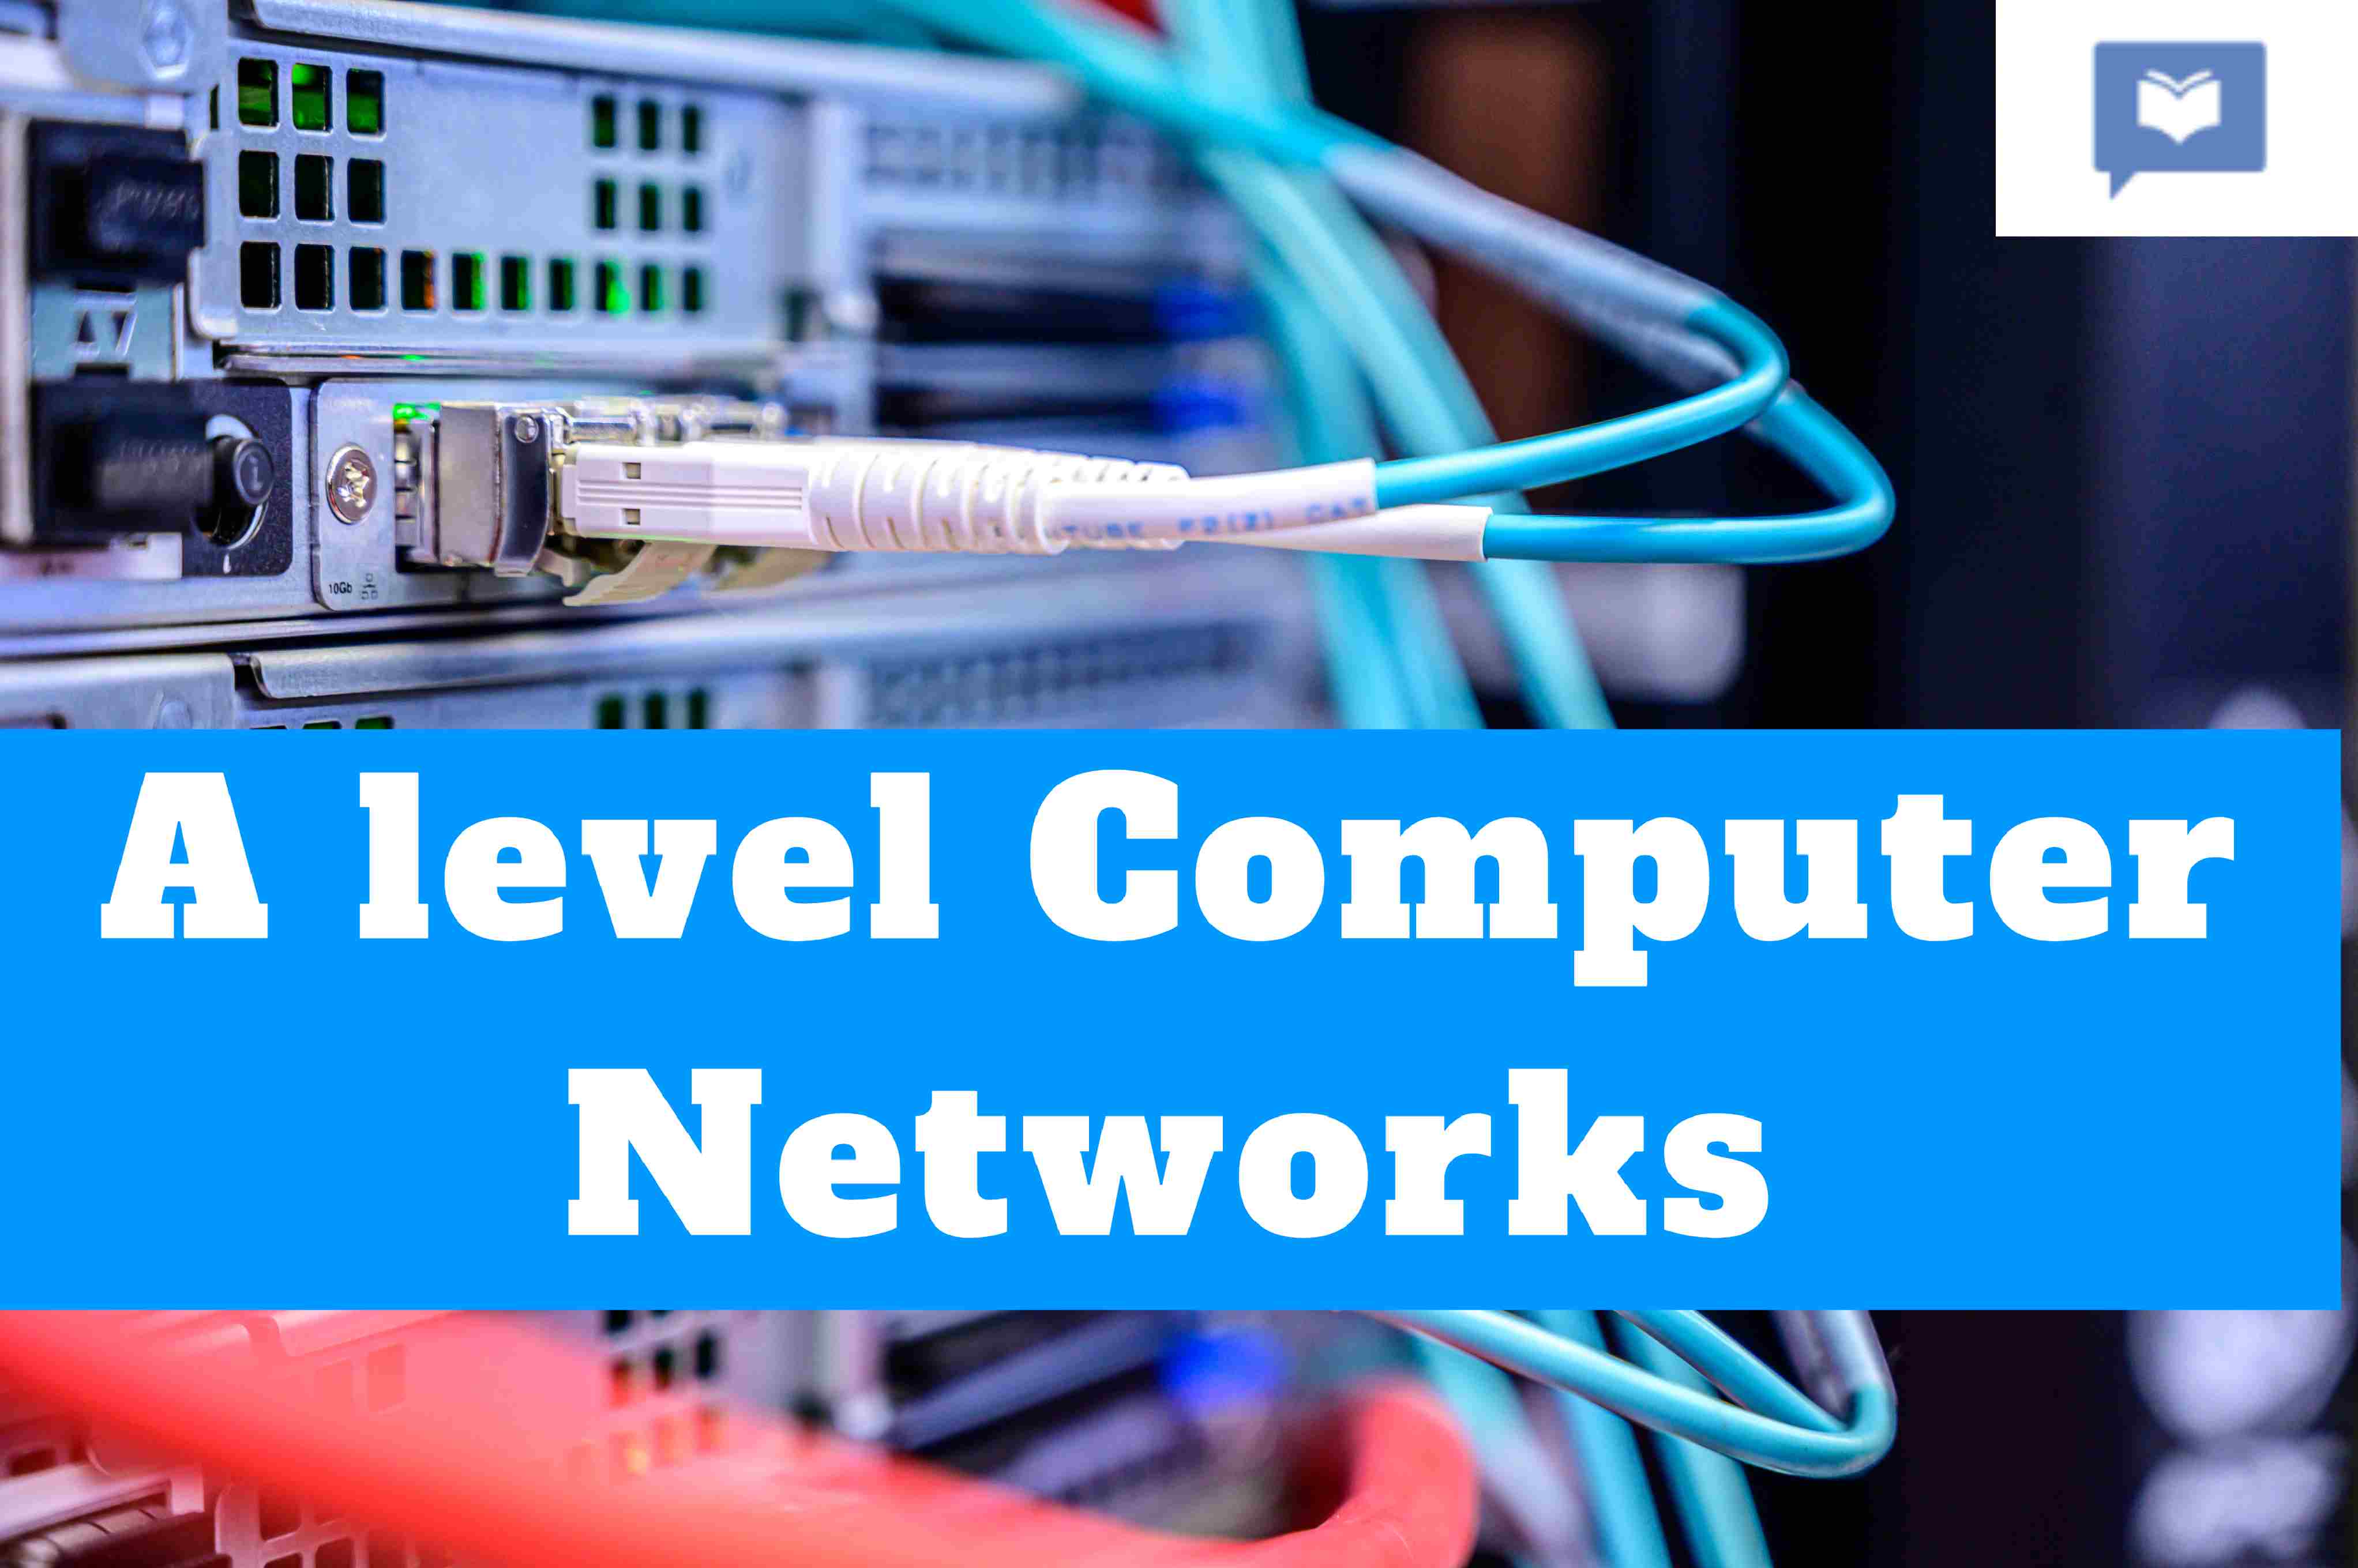 A level Computer Networks - Data Communication and Network Security Quizzes